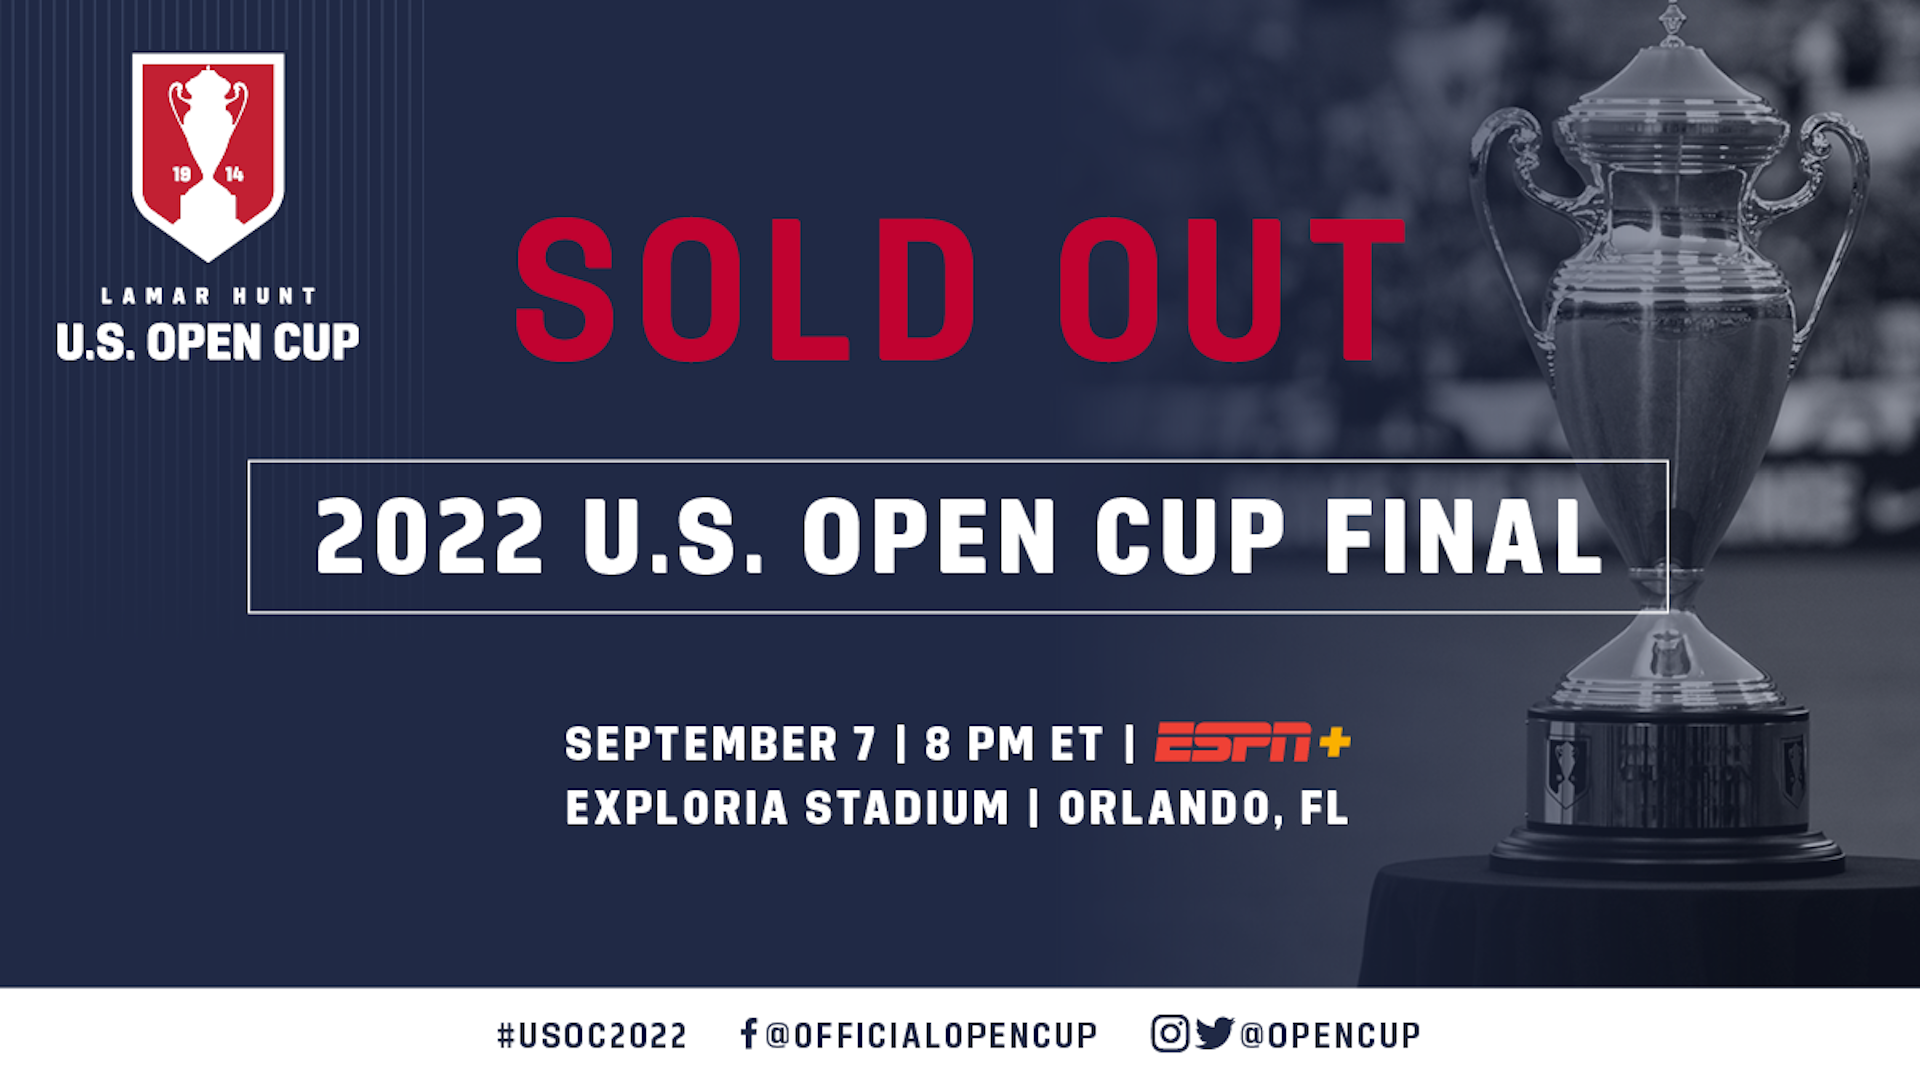 2022 U.S. Lamar Hunt Open Cup Final Tickets Officially Sold Out